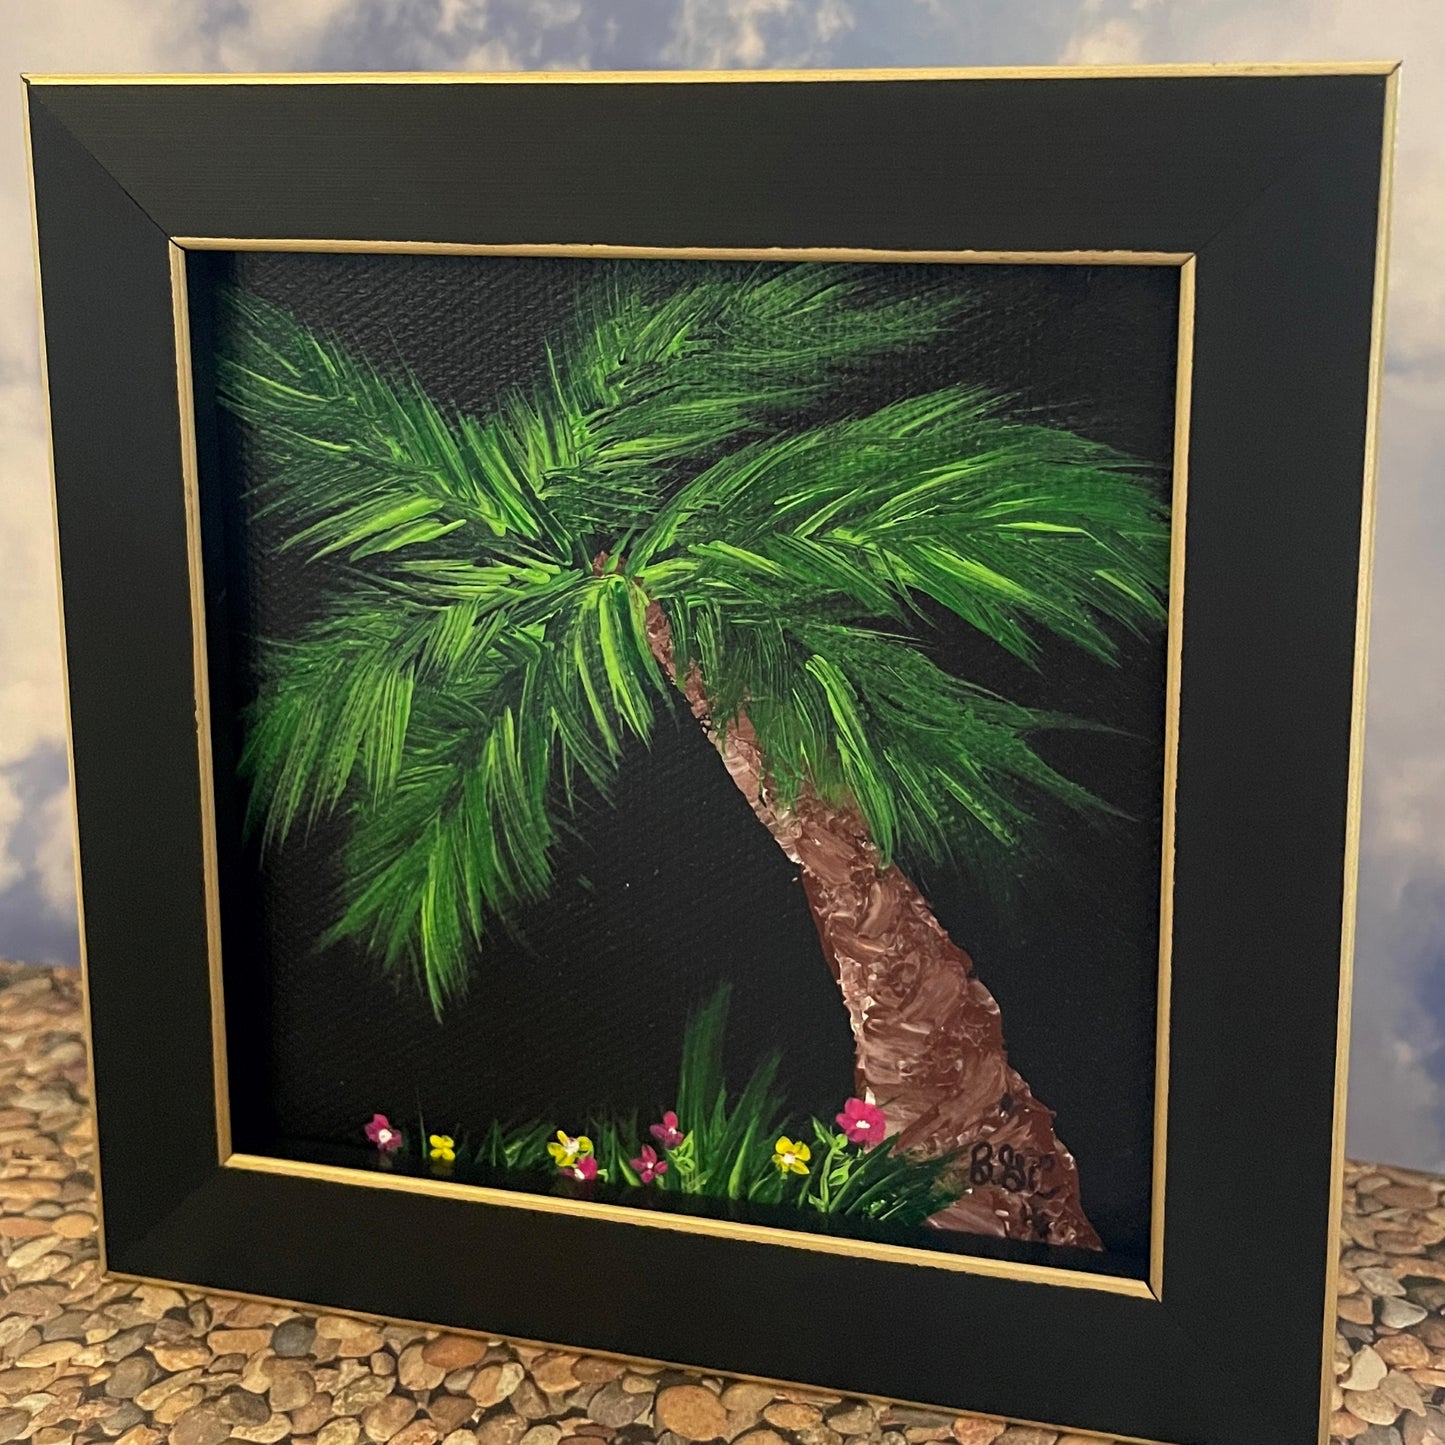 Original Painting of a Palm Tree with in Flowers Florida